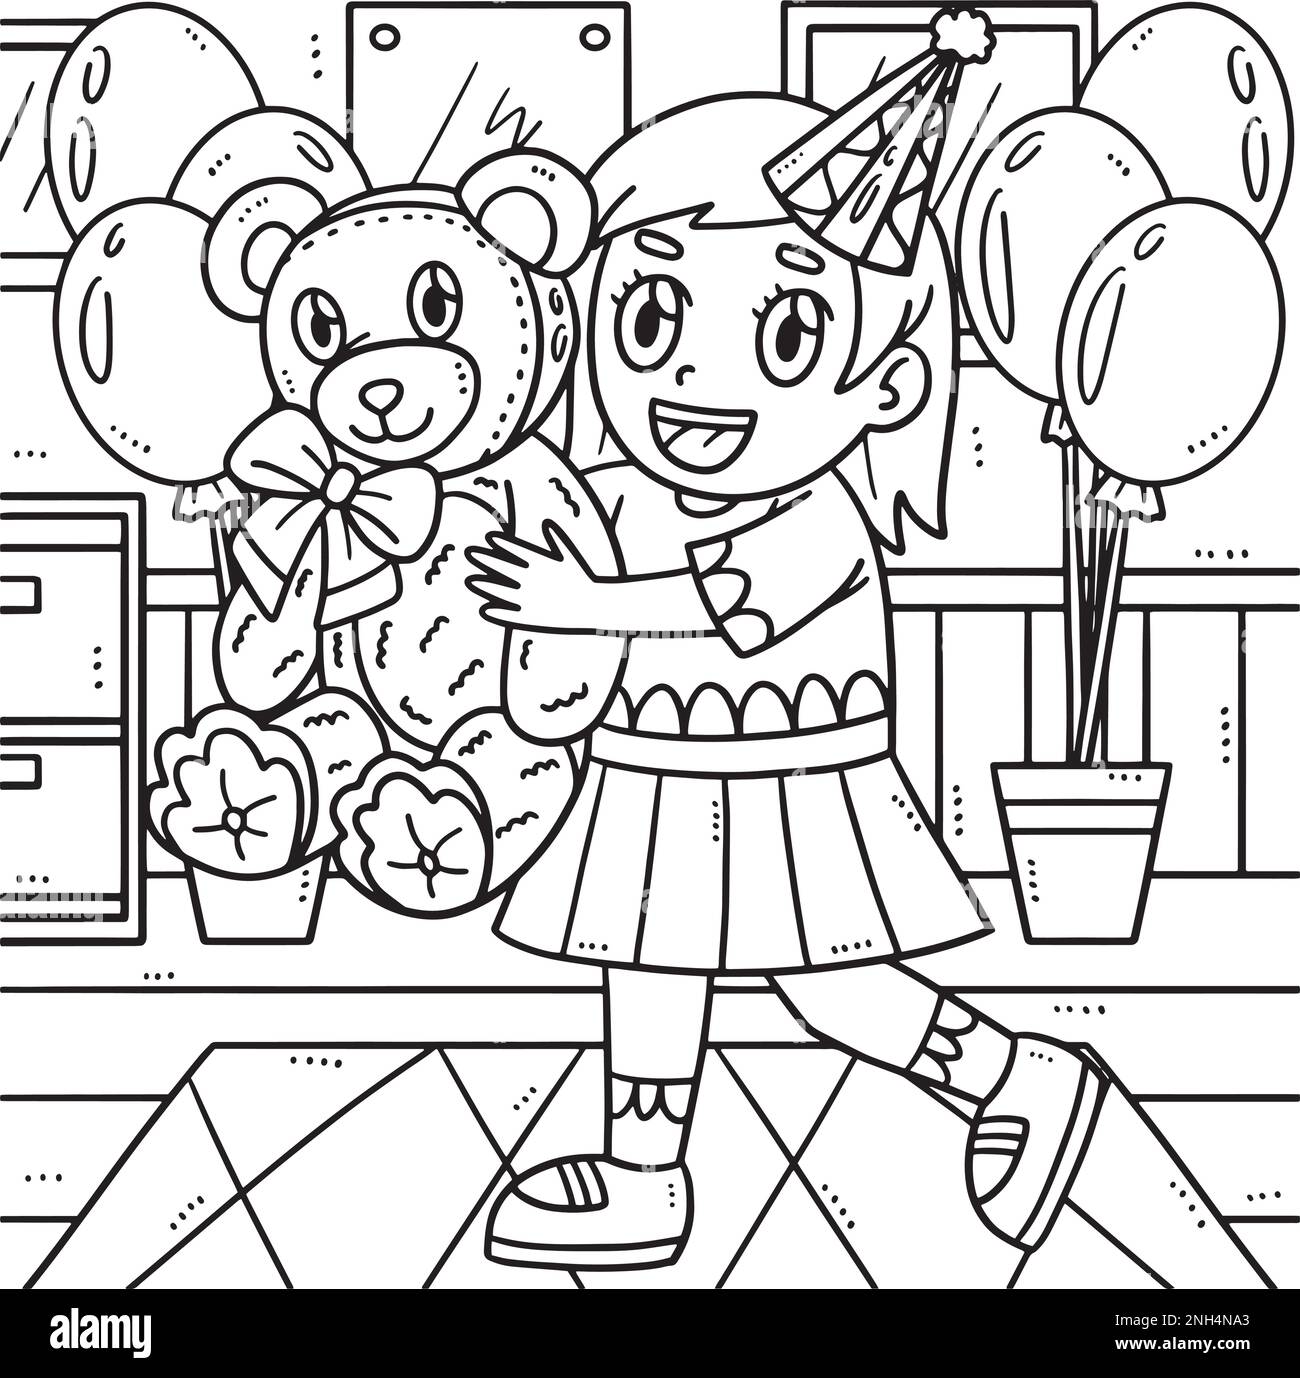 Birthday Girl Holding Teddy Bear Coloring Page Stock Vector